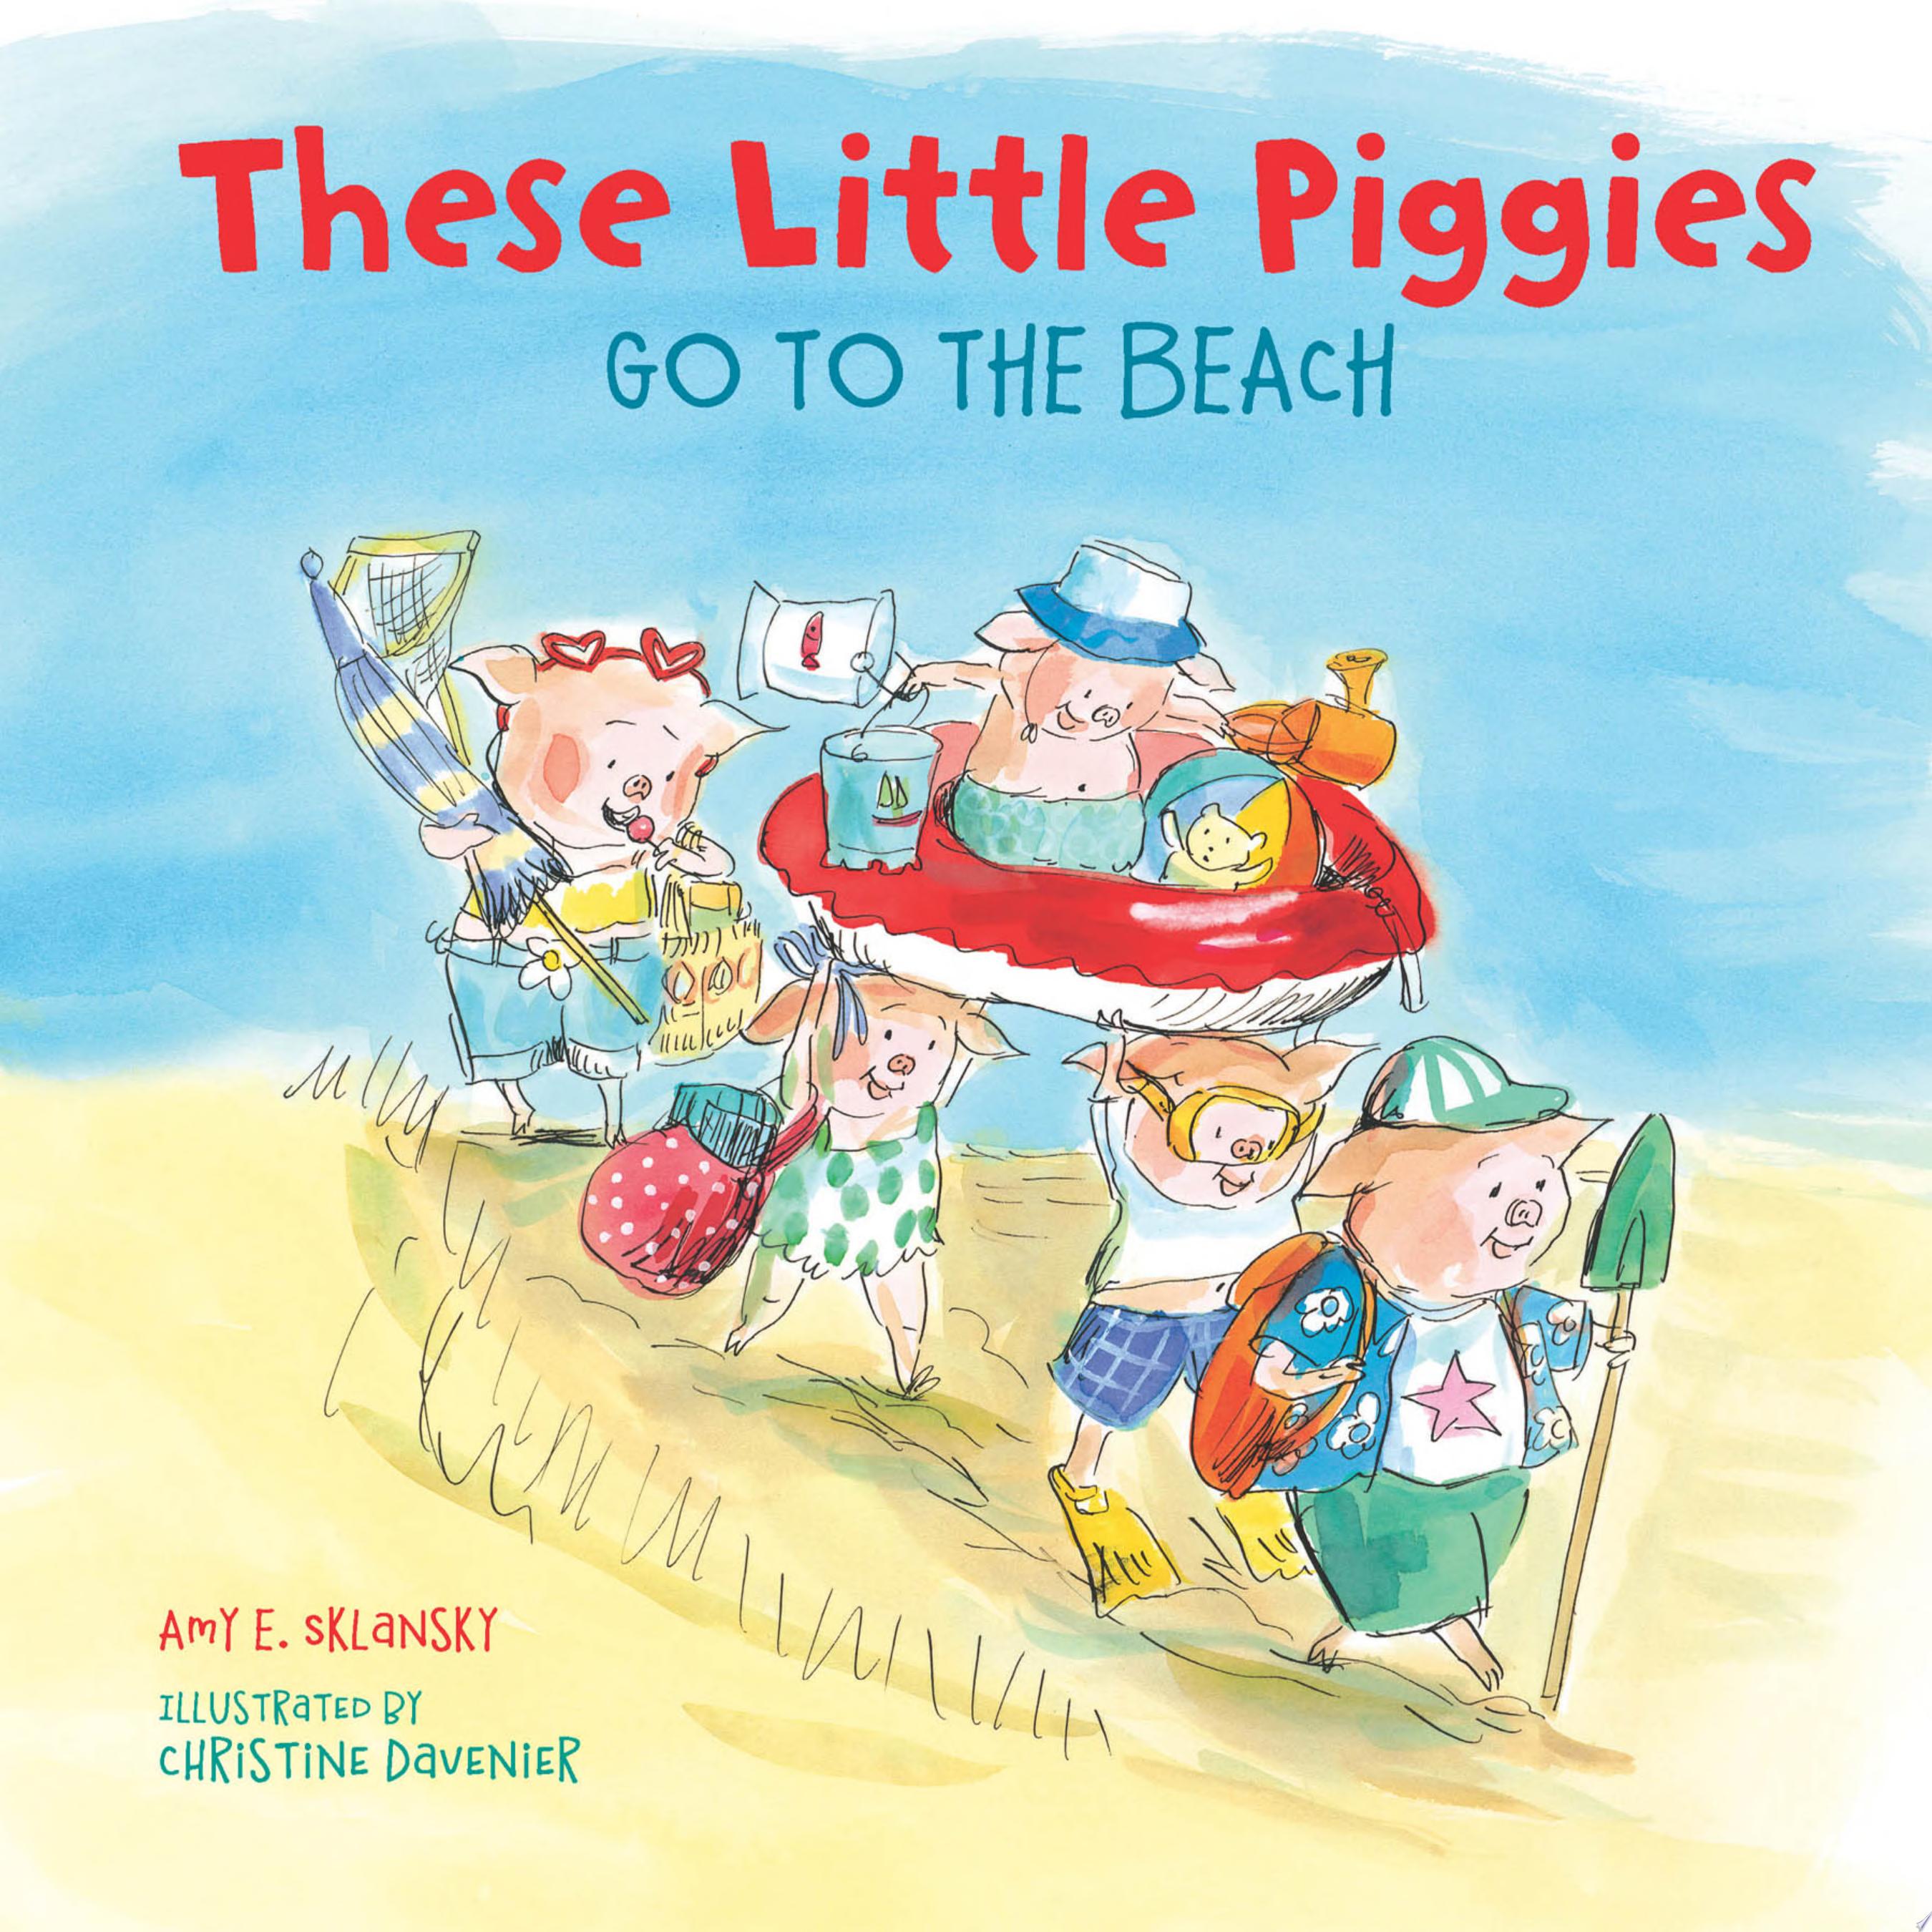 Image for "These Little Piggies Go to the Beach"